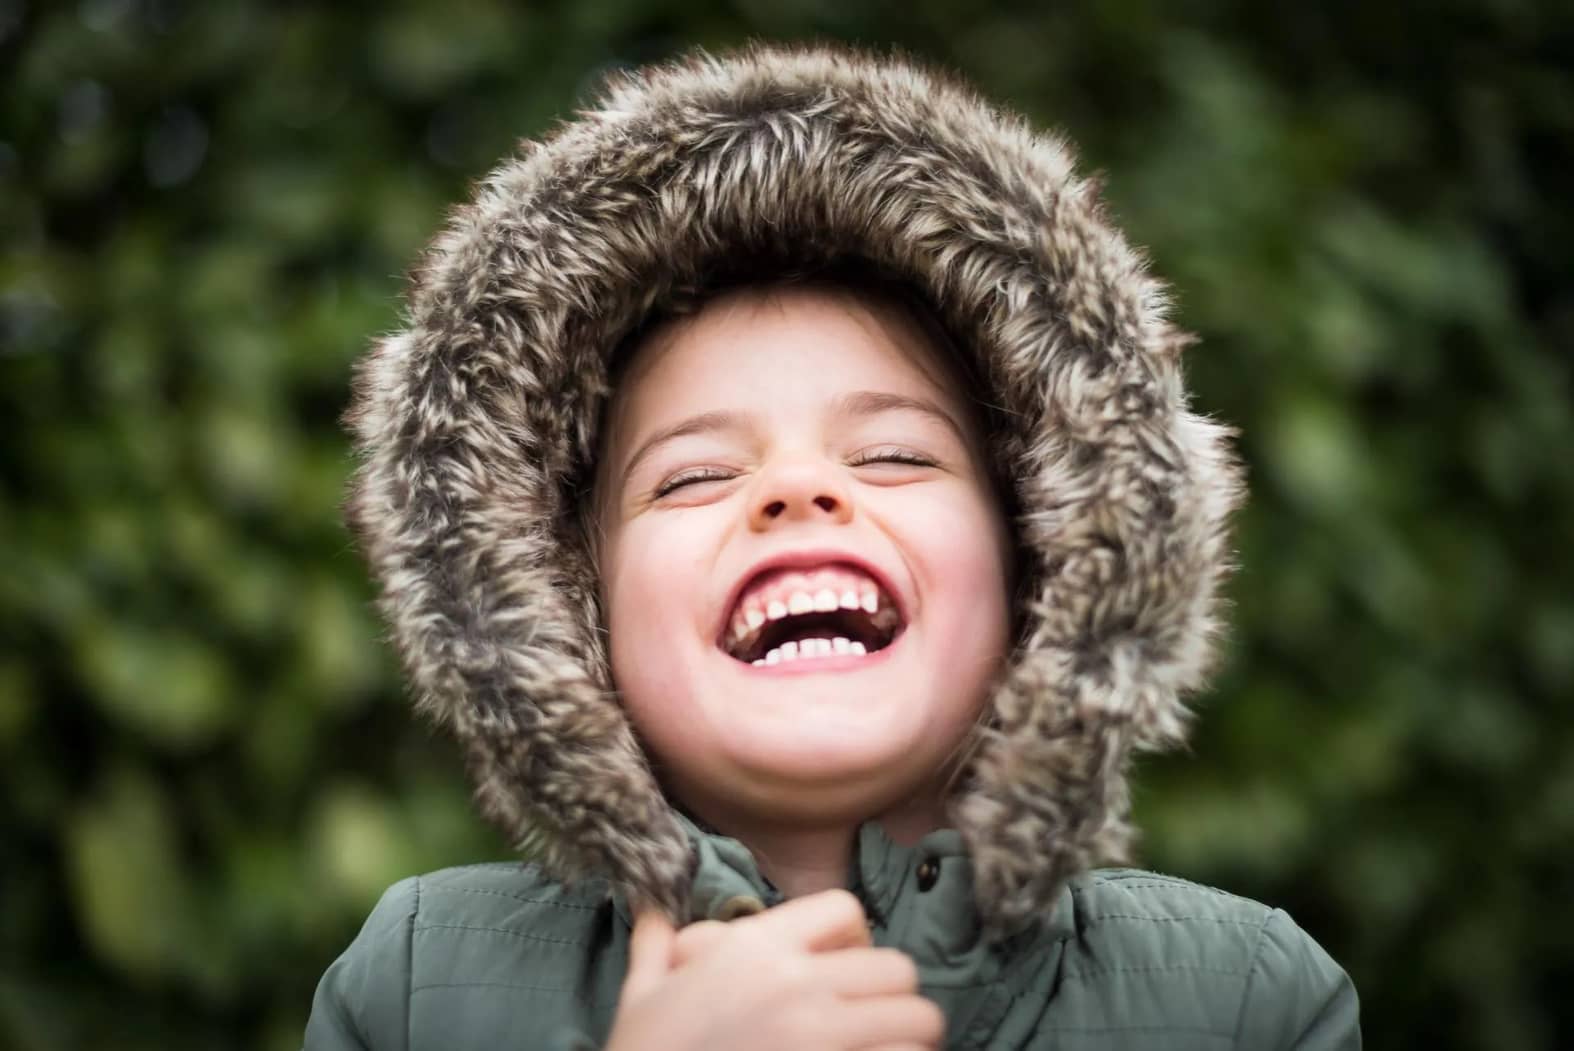 How to Build a Child's Confidence in 5 Proven Steps